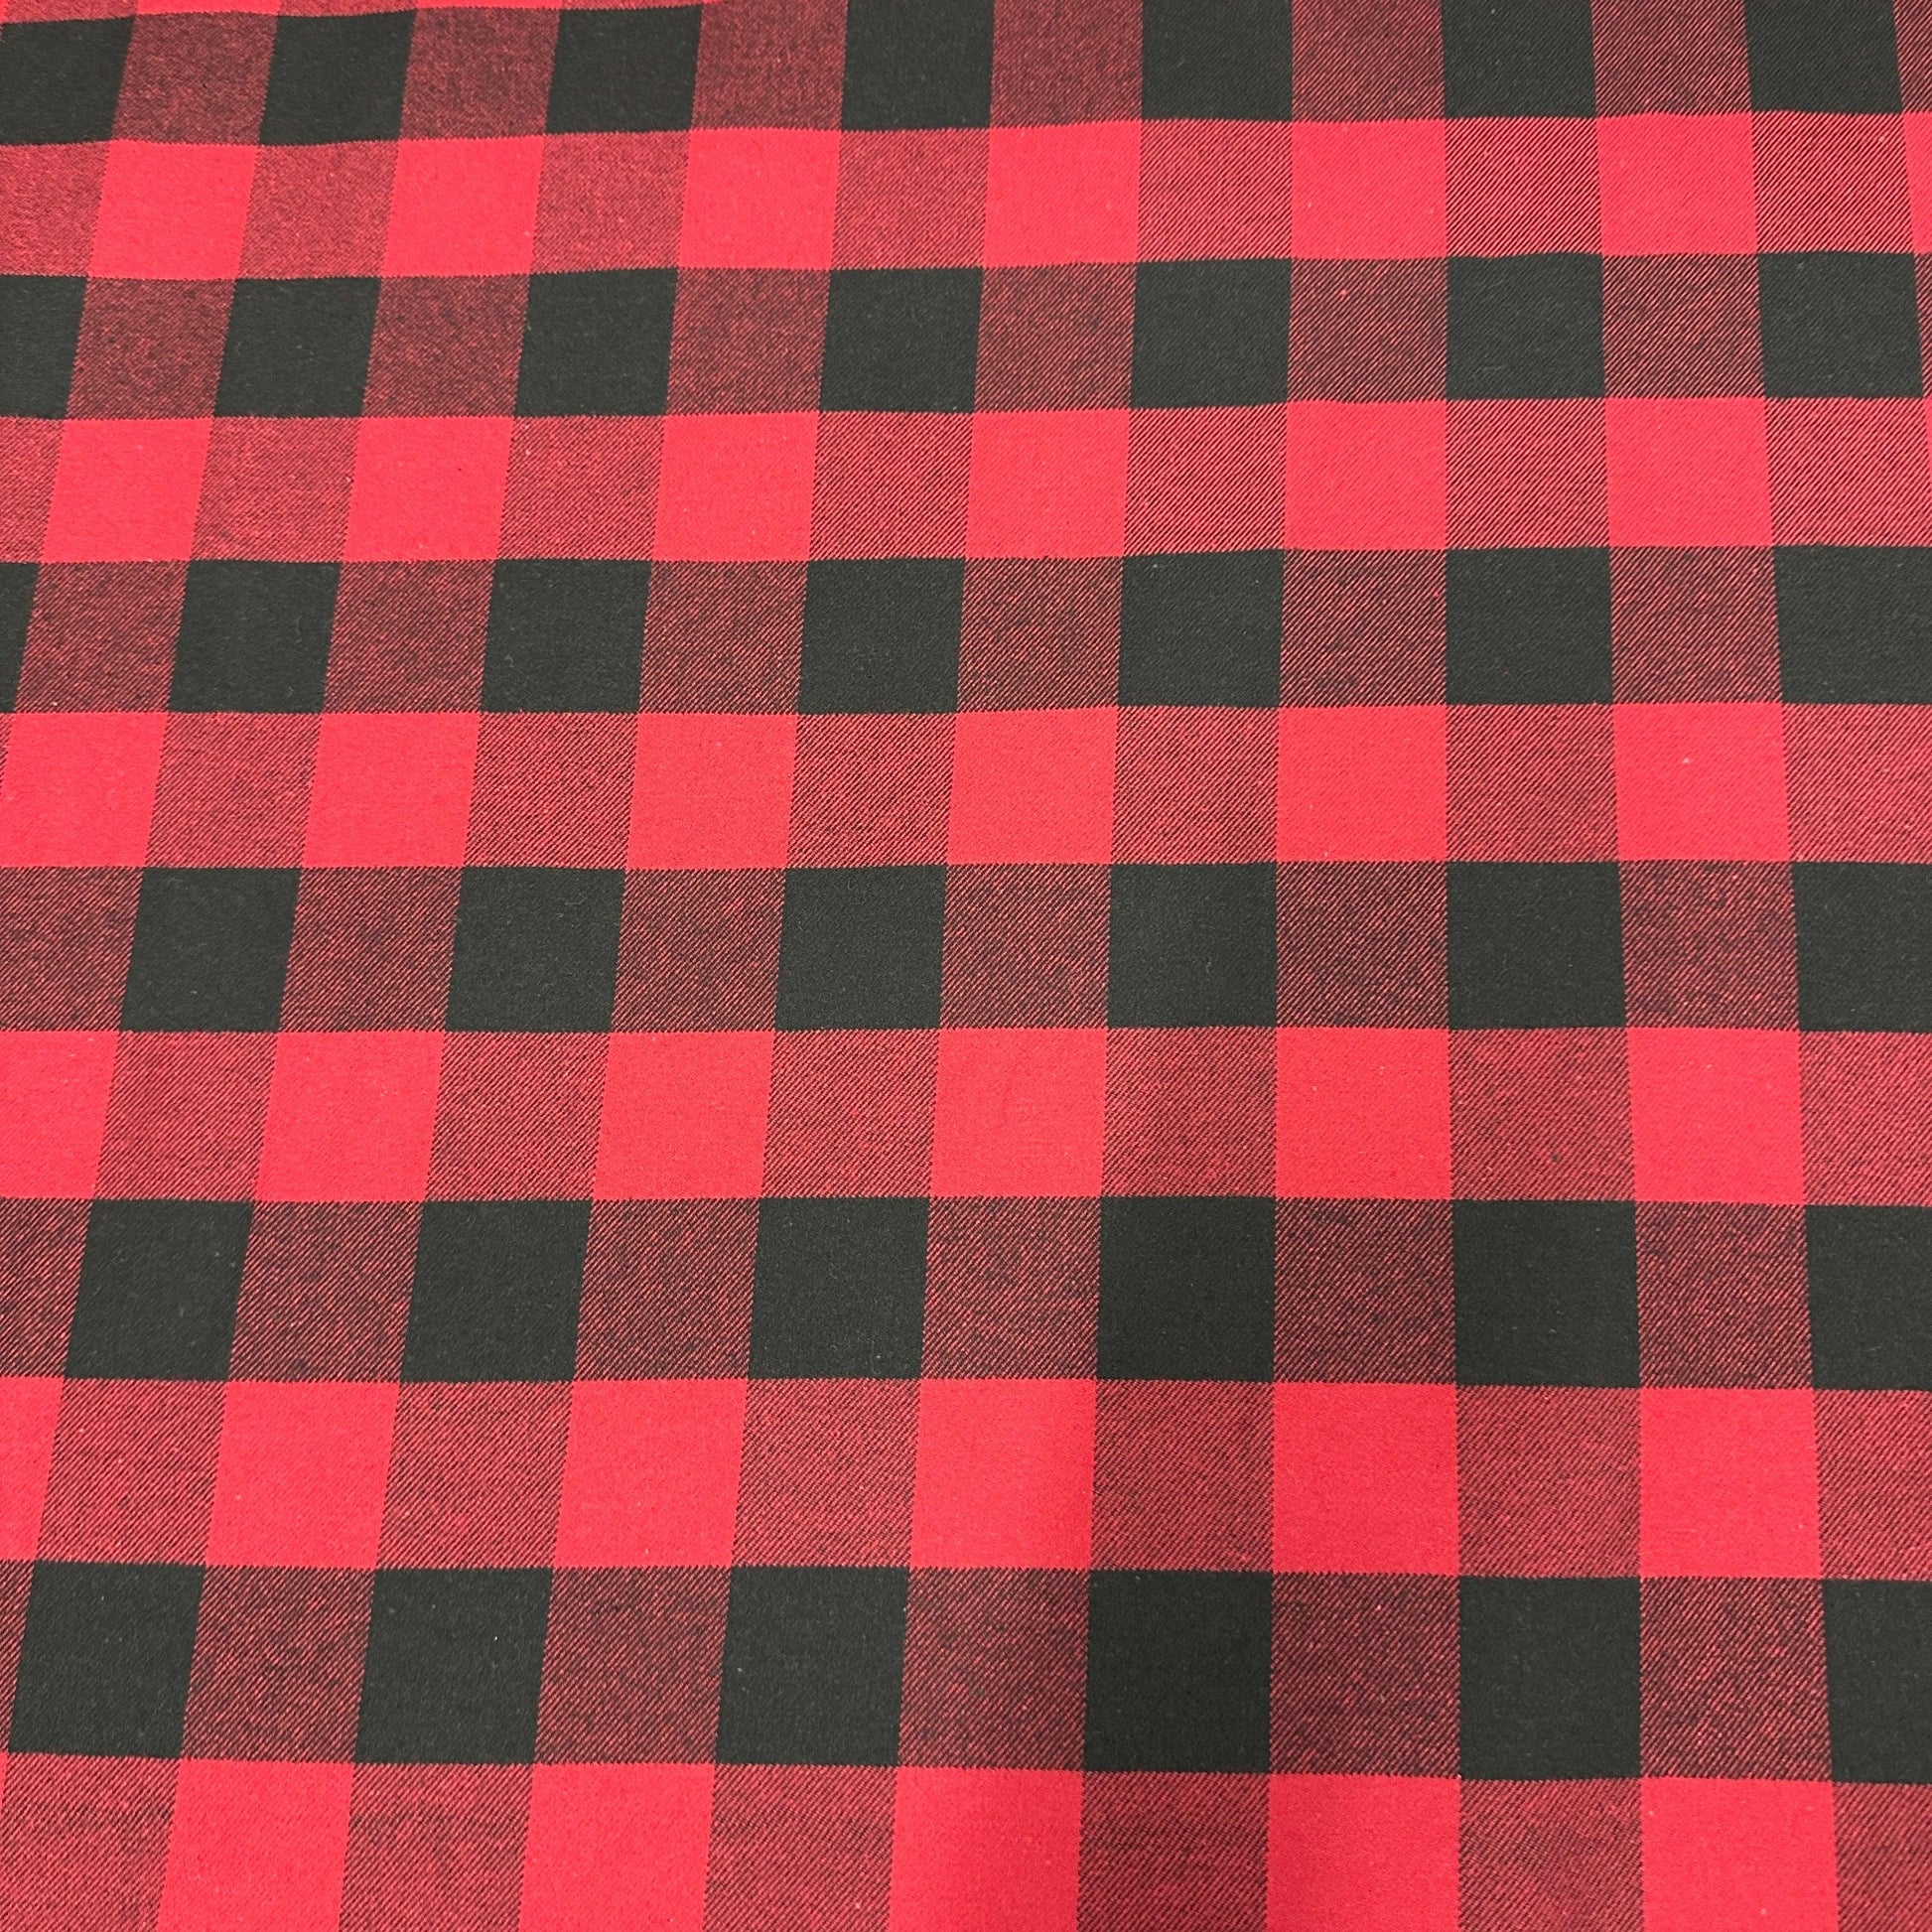 Red & Gray Plaid Cotton Flannel Fabric - 60 Wide - Sold by the Yard and  Bolt